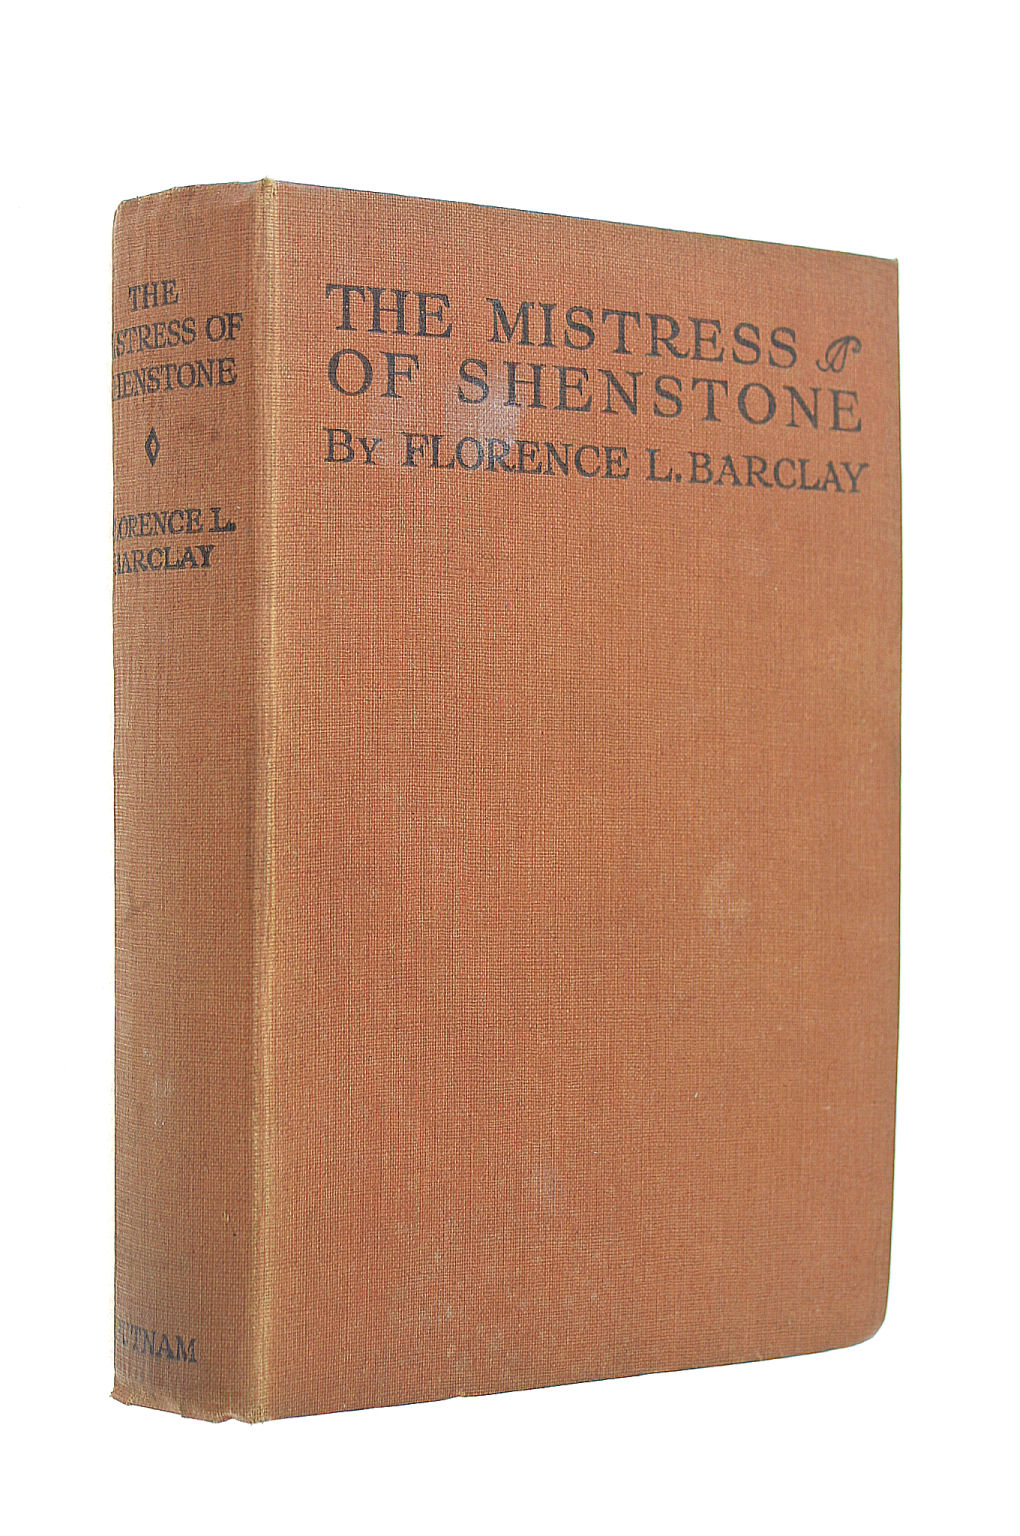 FLORENCE L. BARCLAY - The Mistress of Shenstone